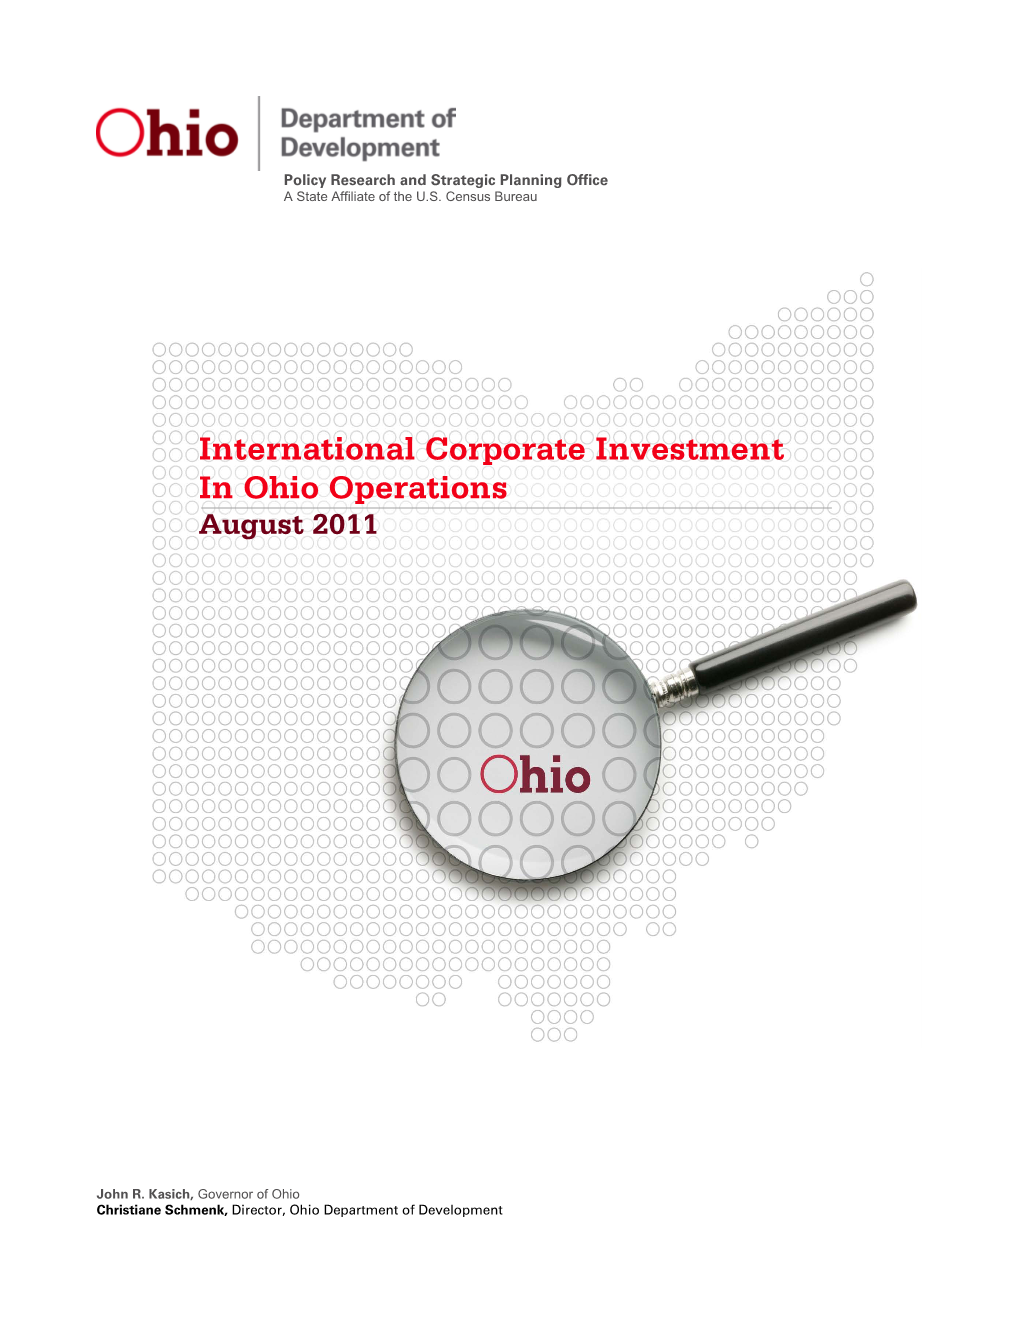 International Corporate Investment in Ohio Operations August 2011